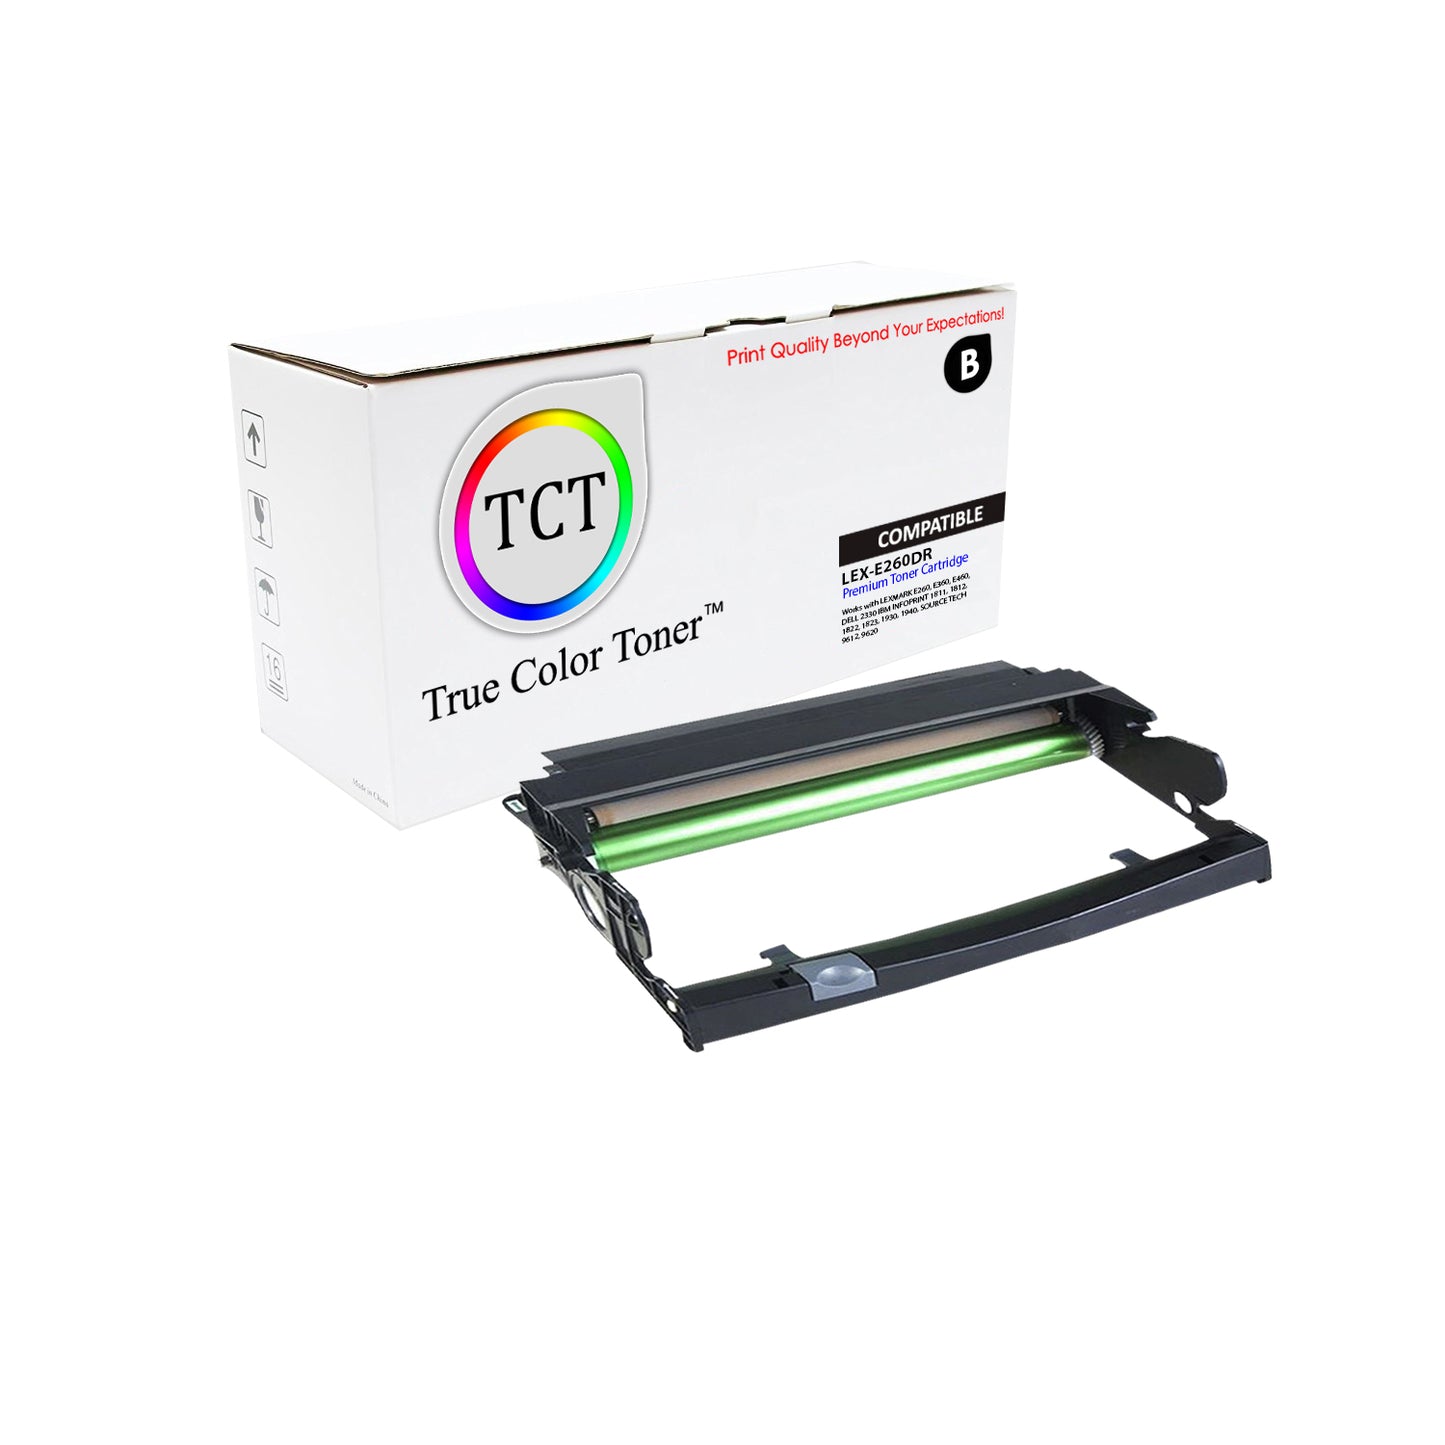 TCT Compatible Drum Unit Replacement for the Lexmark E260 Series - 1 Pack Black